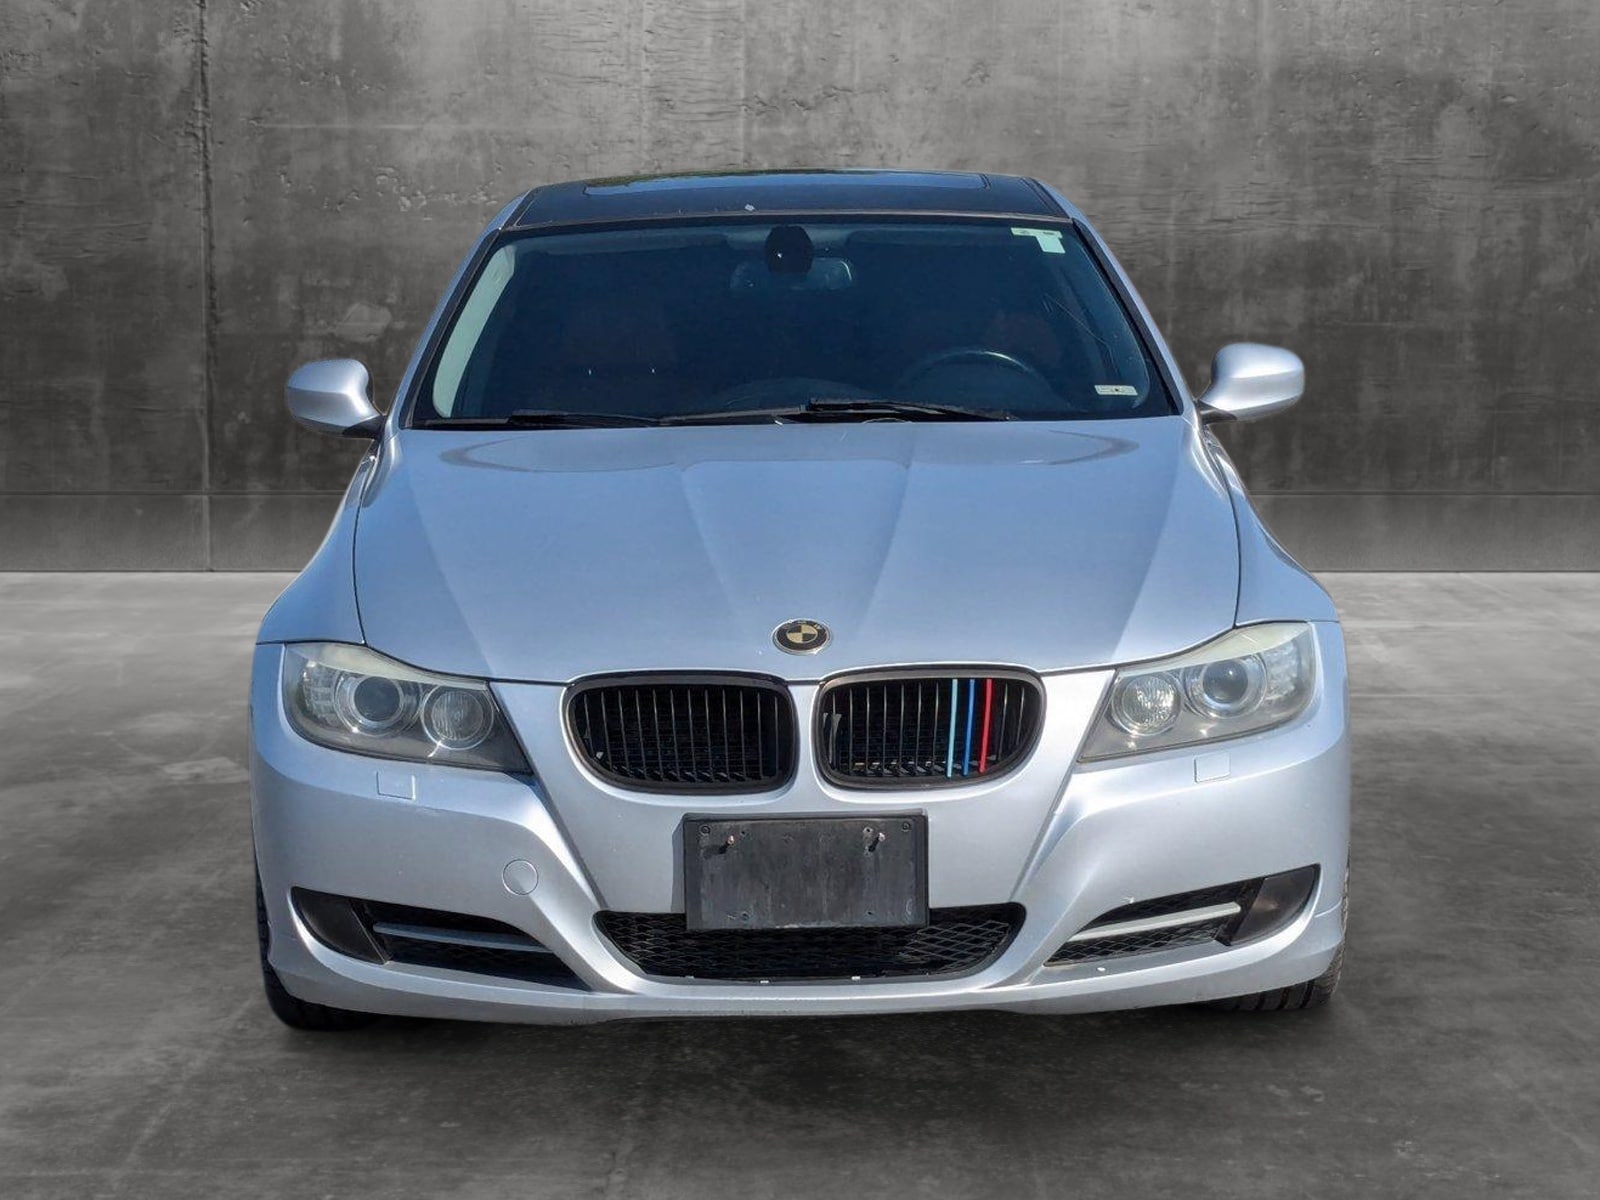 Used 2011 BMW 3 Series 335i with VIN WBAPL5C55BA919366 for sale in Spokane, WA